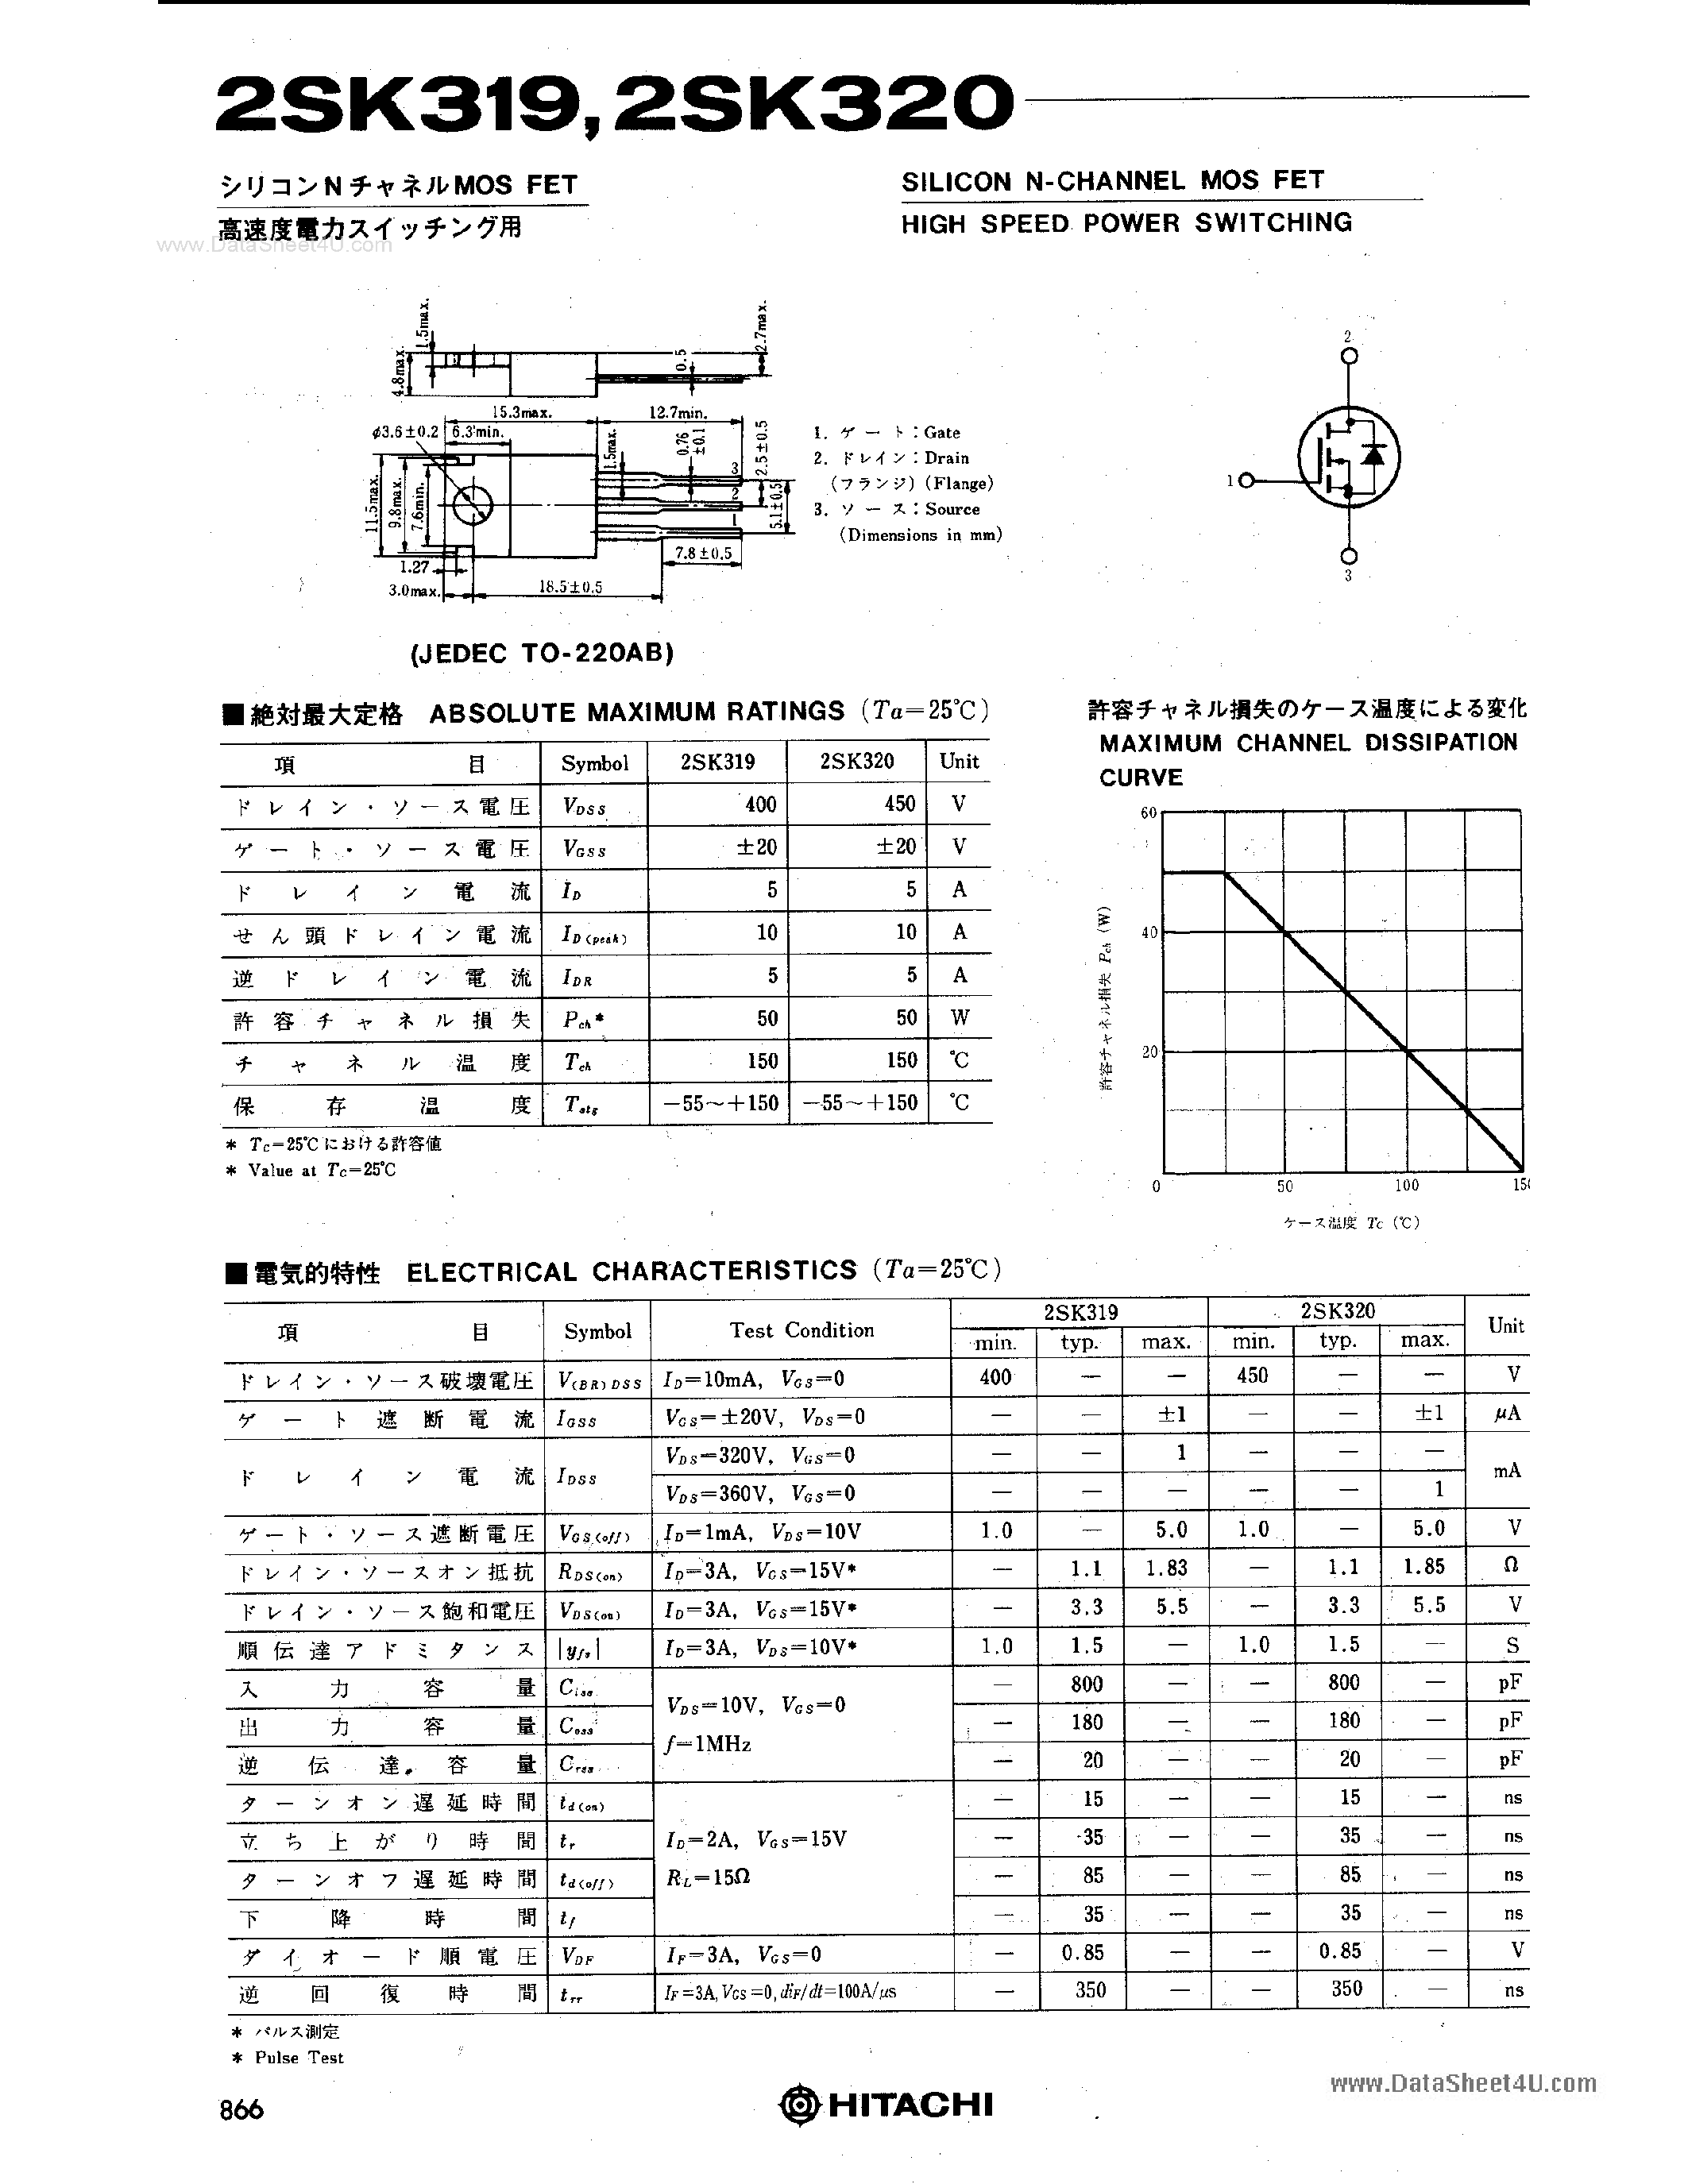 Datasheet 2SK319 - (2SK319 / 2SK320) SILICON N-CHANNEL MOS FET page 1